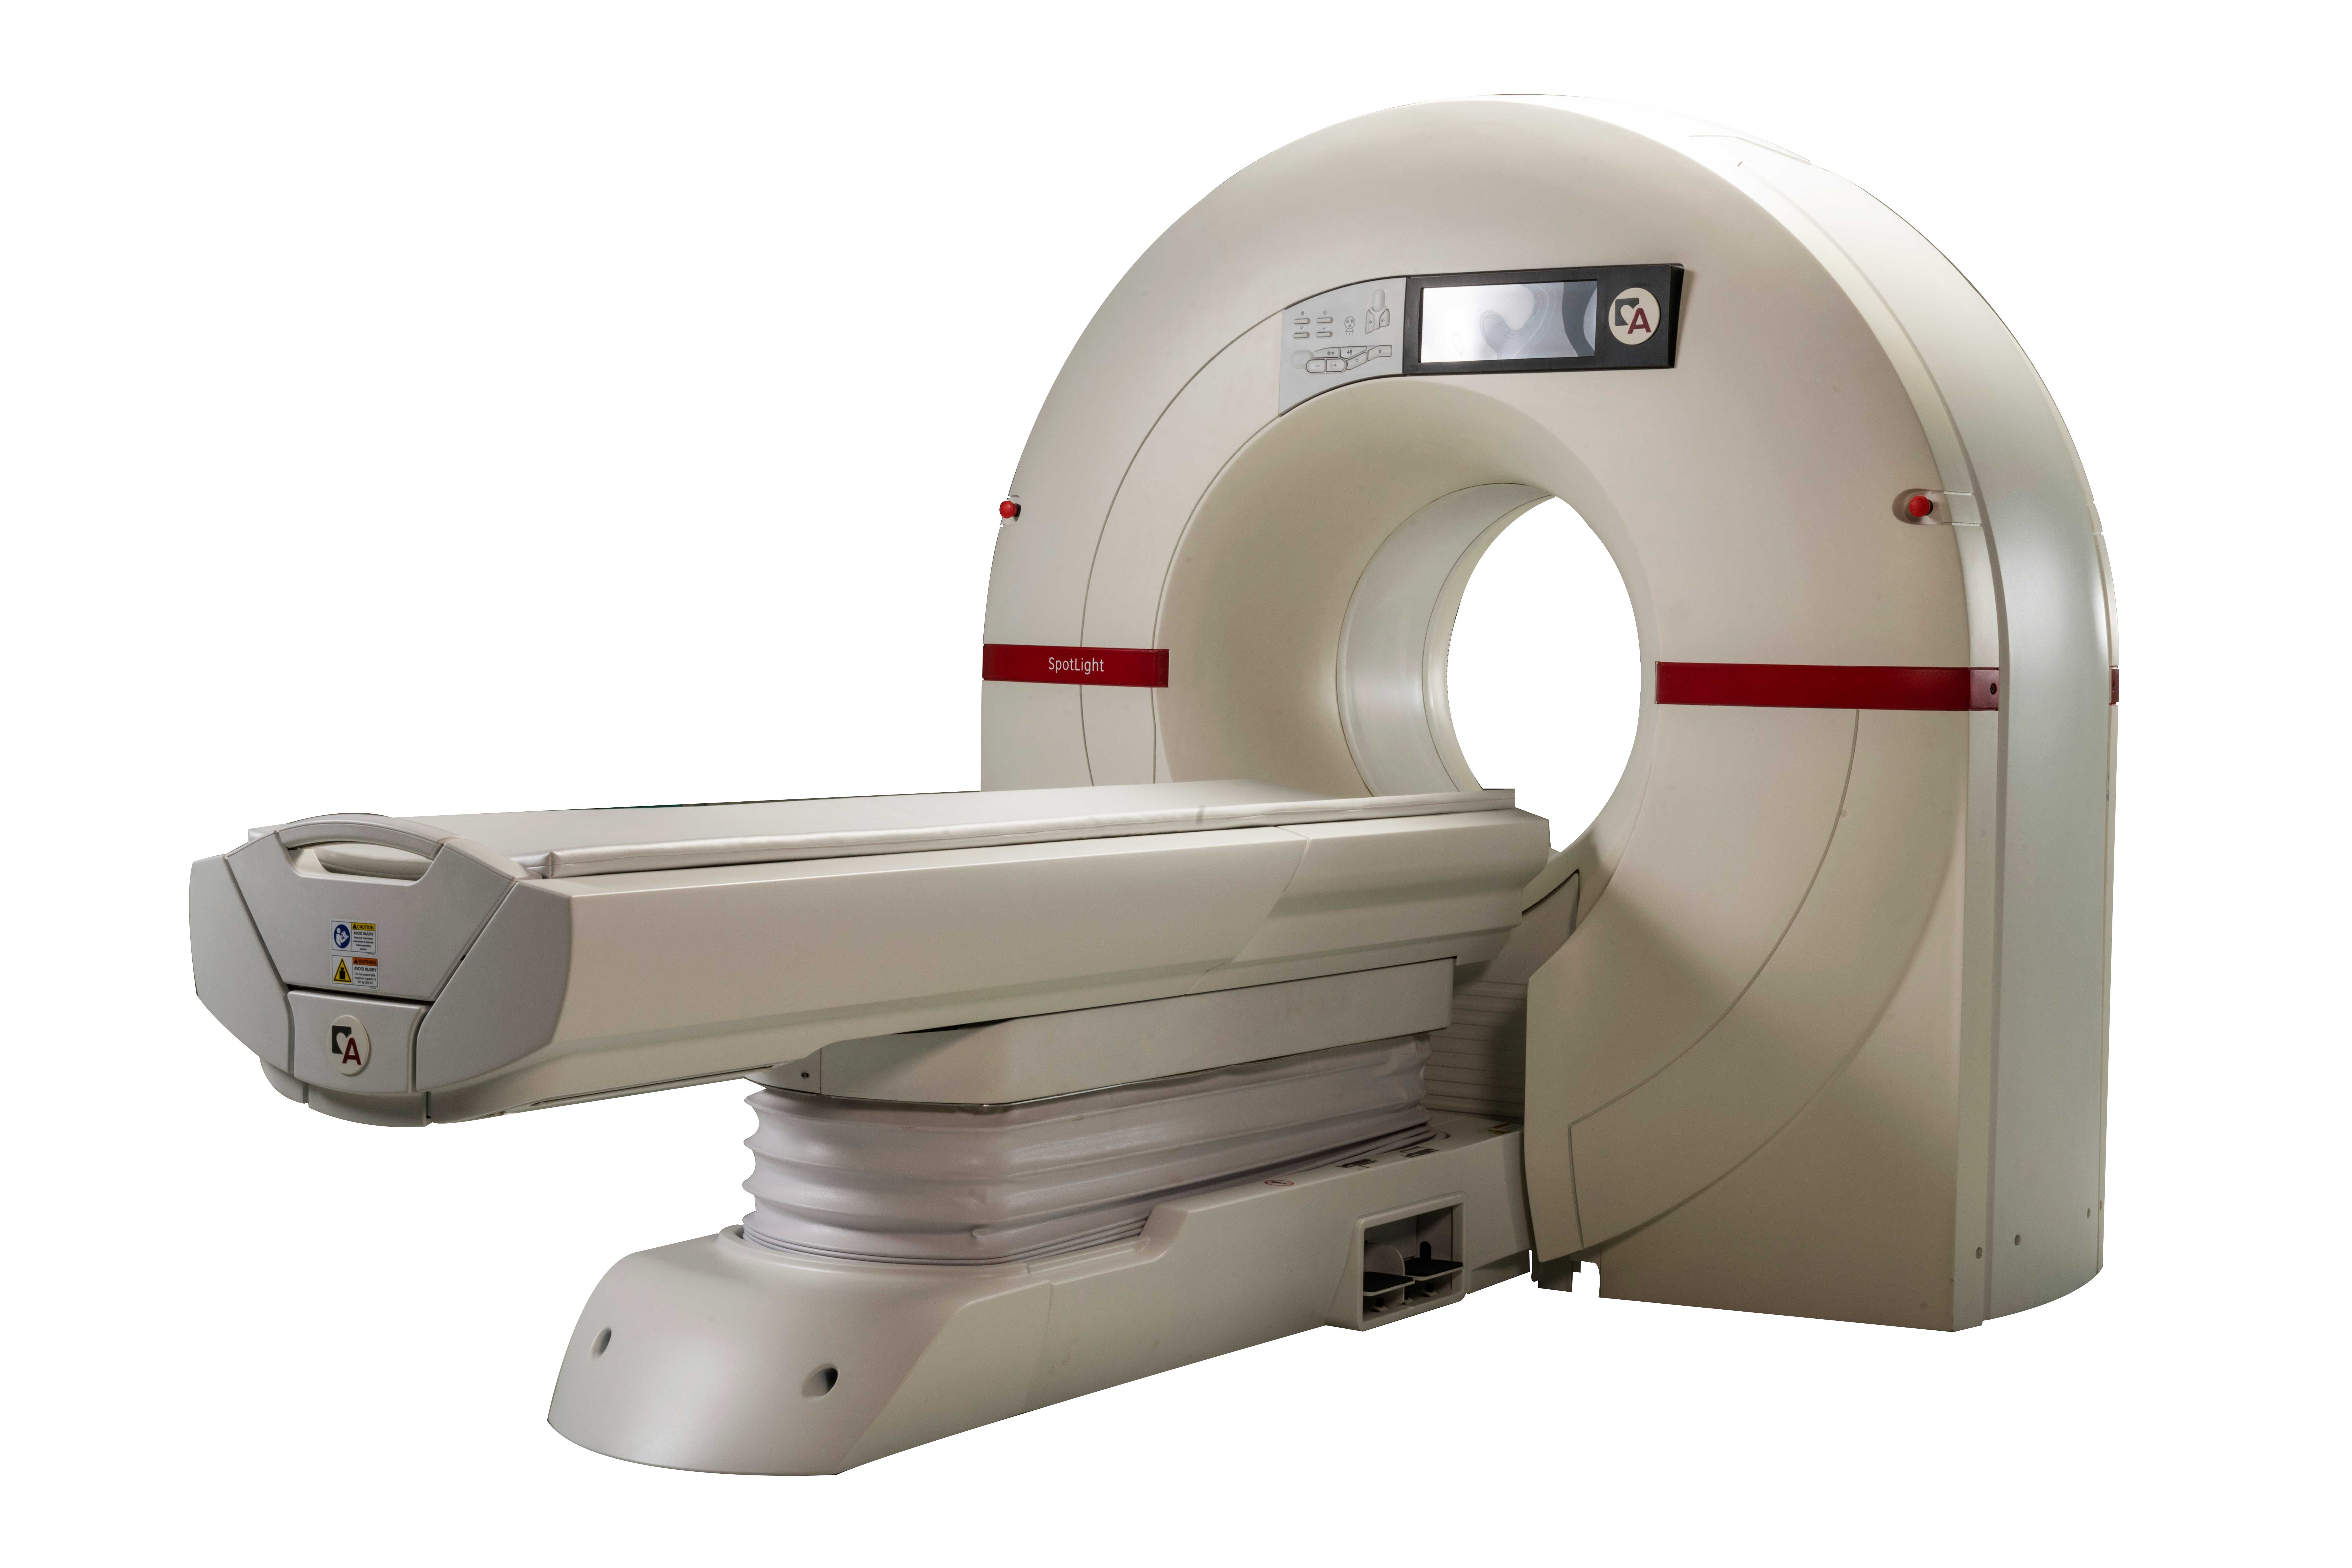 SpotLight and SpotLight Duo family of cardiovascular CT (CCT) scanners